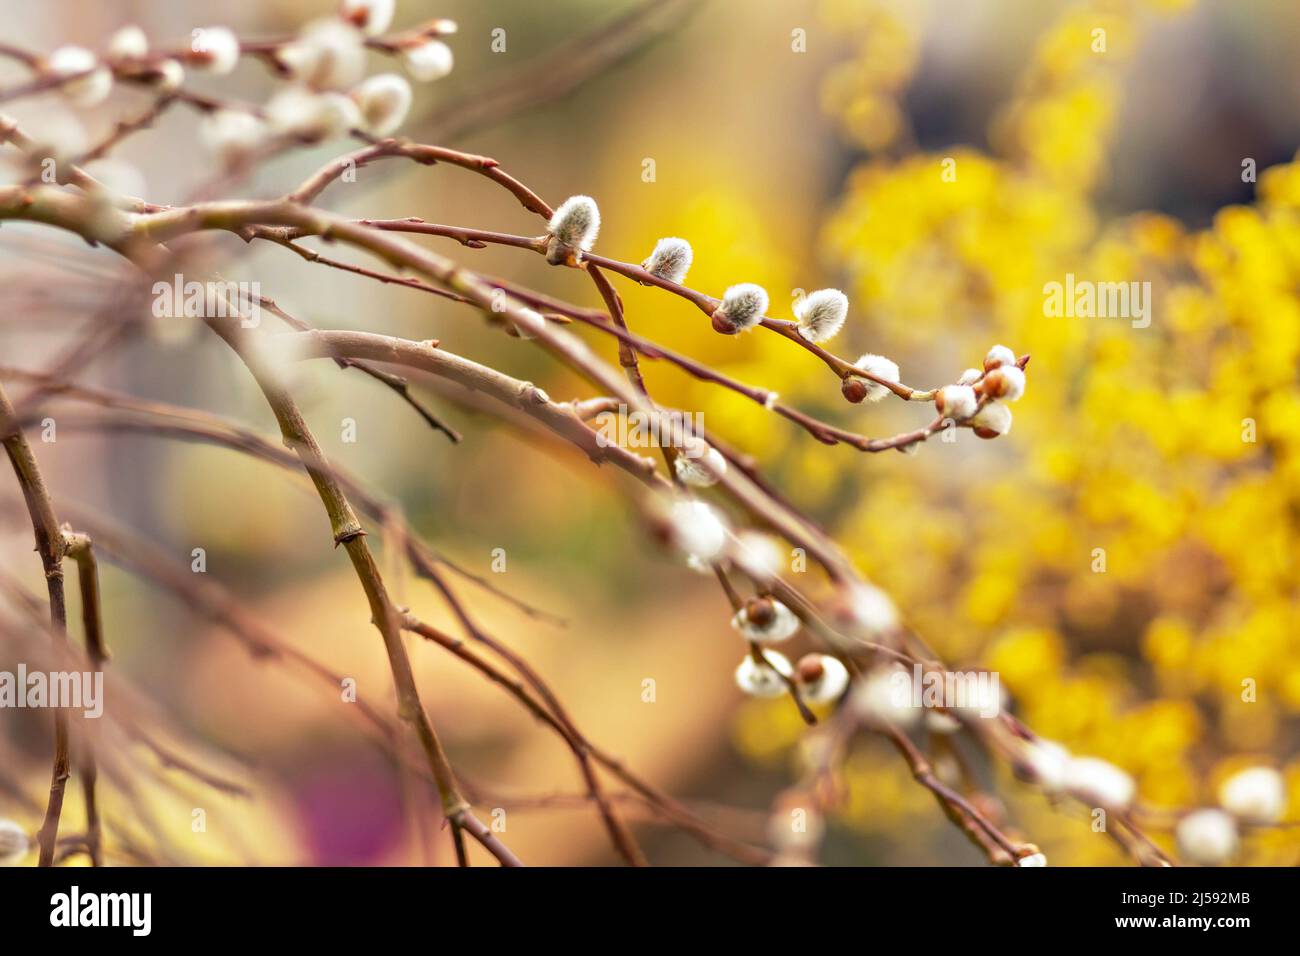 Branches with buds on a tree in a blooming spring garden. Yellow. Natural background. Stock Photo